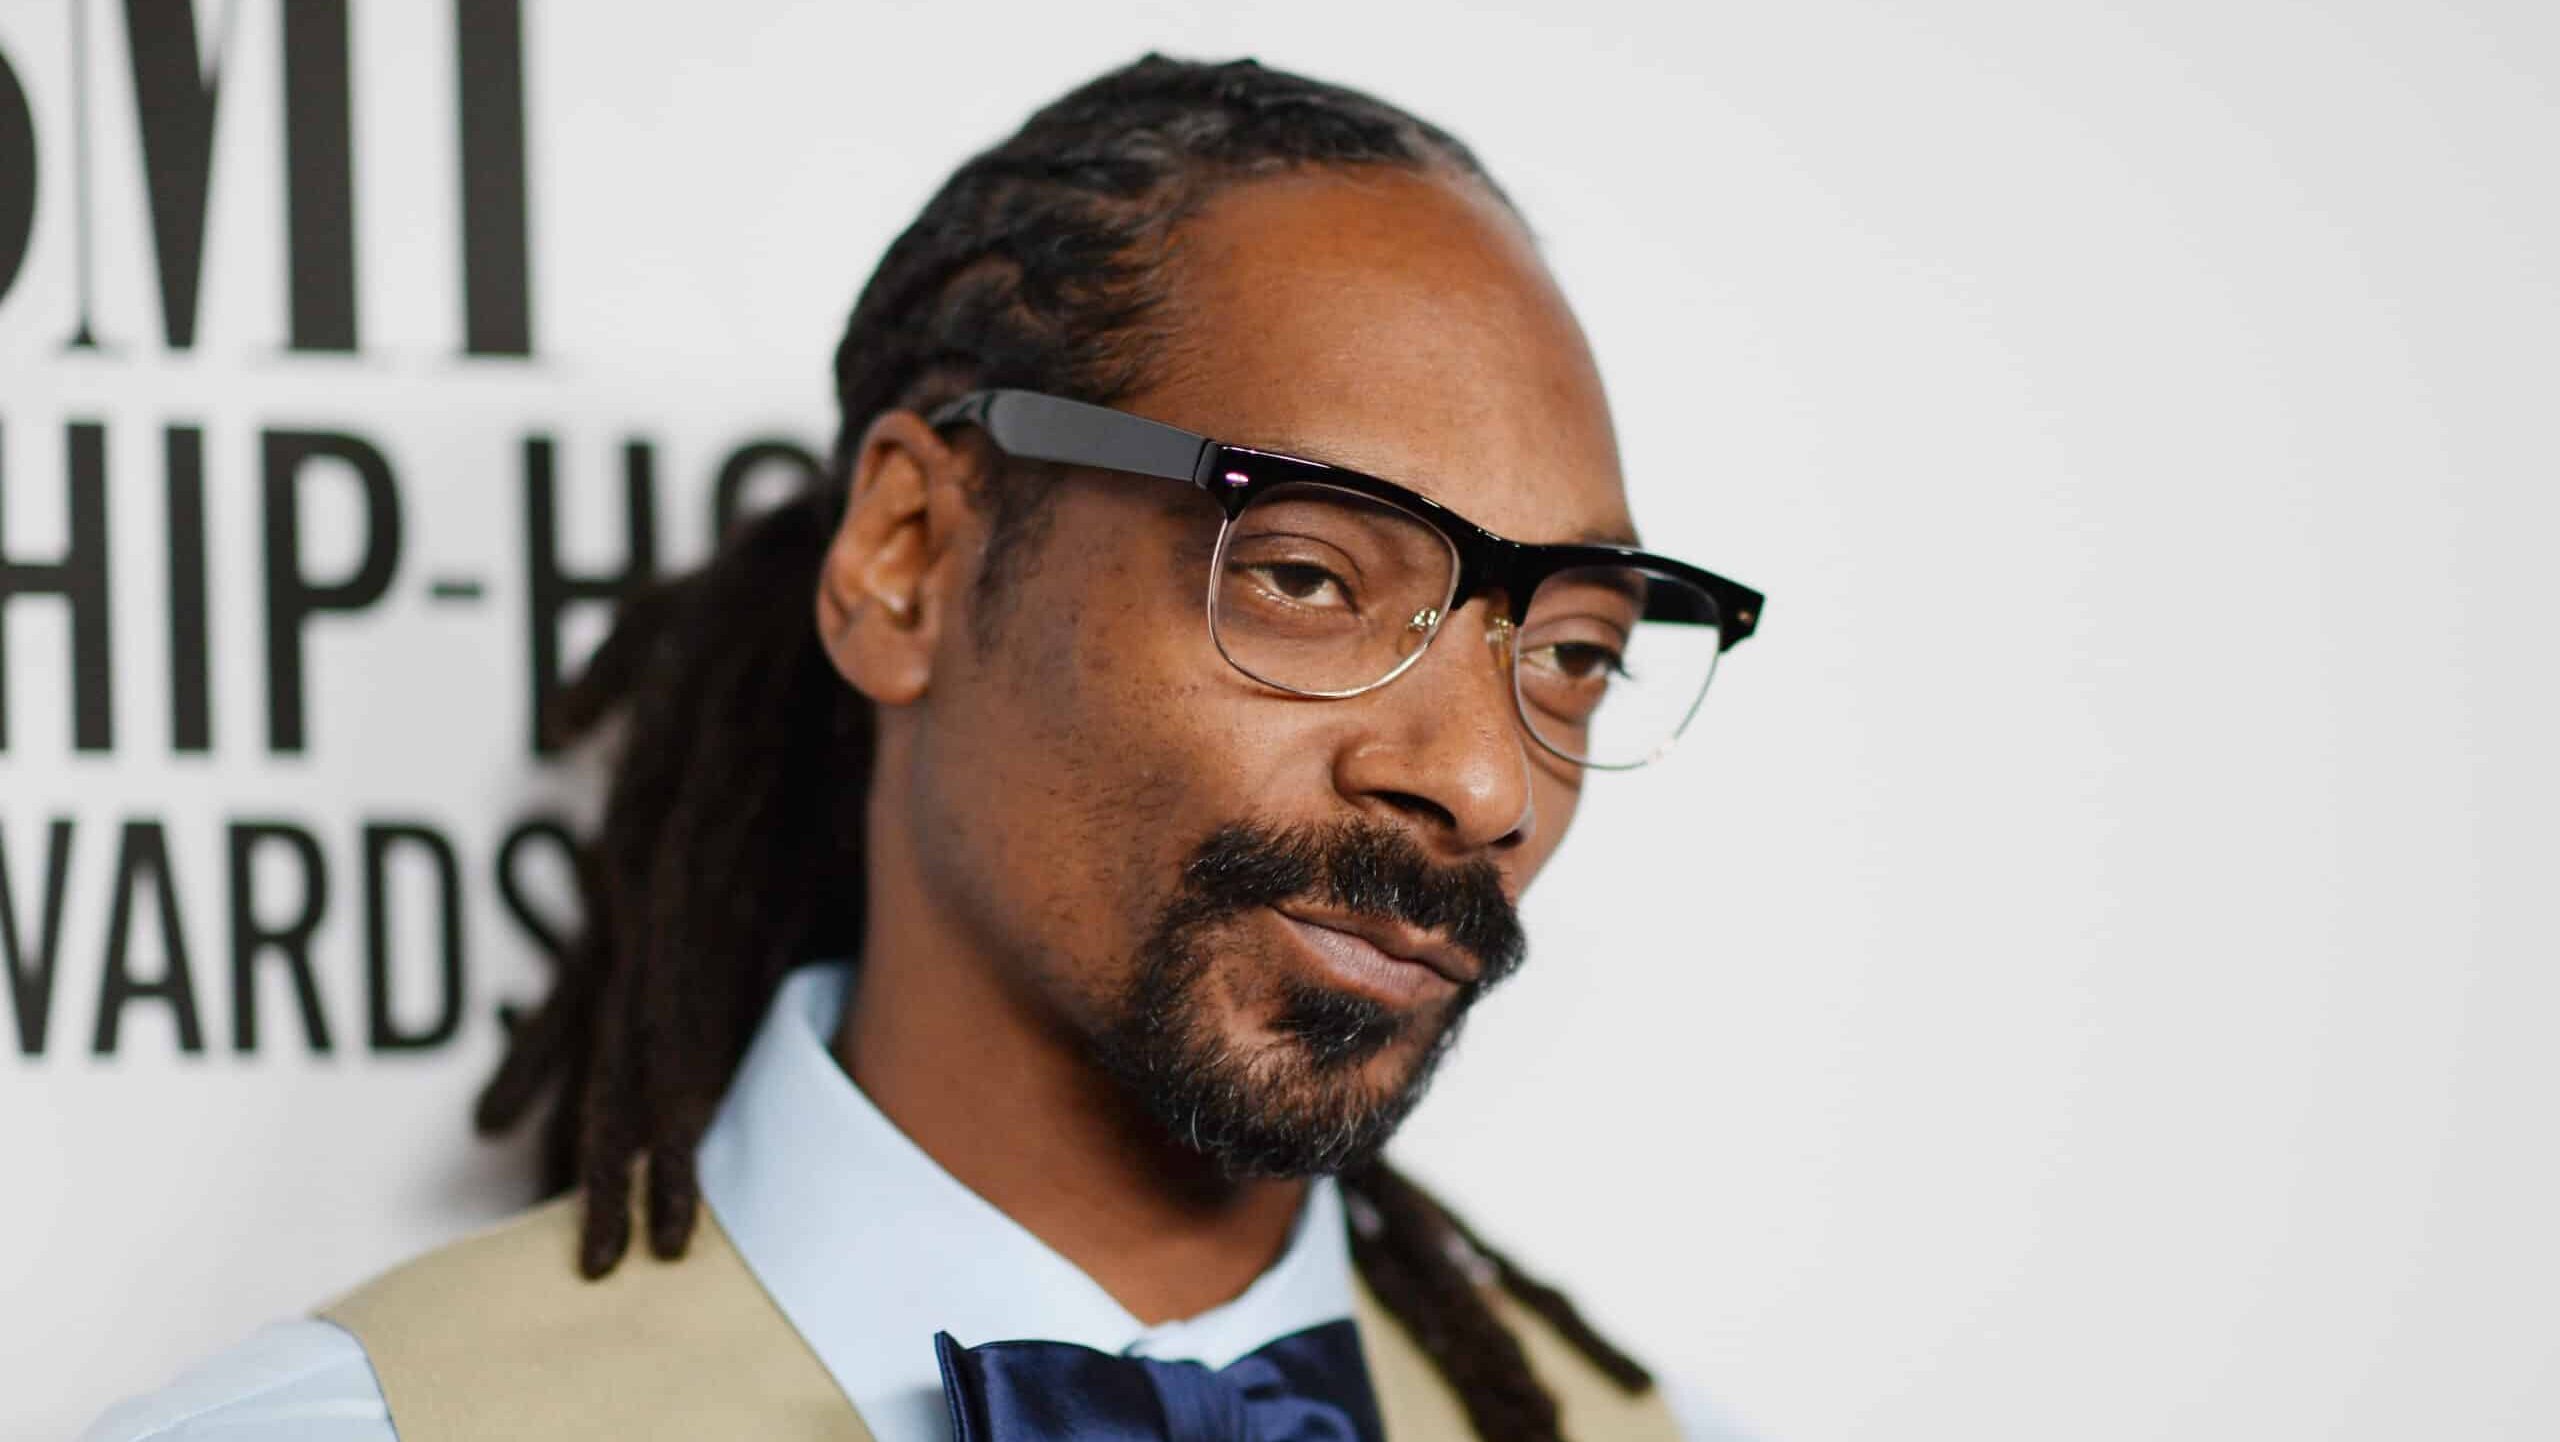 Recording artist Snoop Dogg attends the 2015 BMI R&B/Hip-Hop Awards at Saban Theatre on August 28, 2015 in Beverly Hills, California.